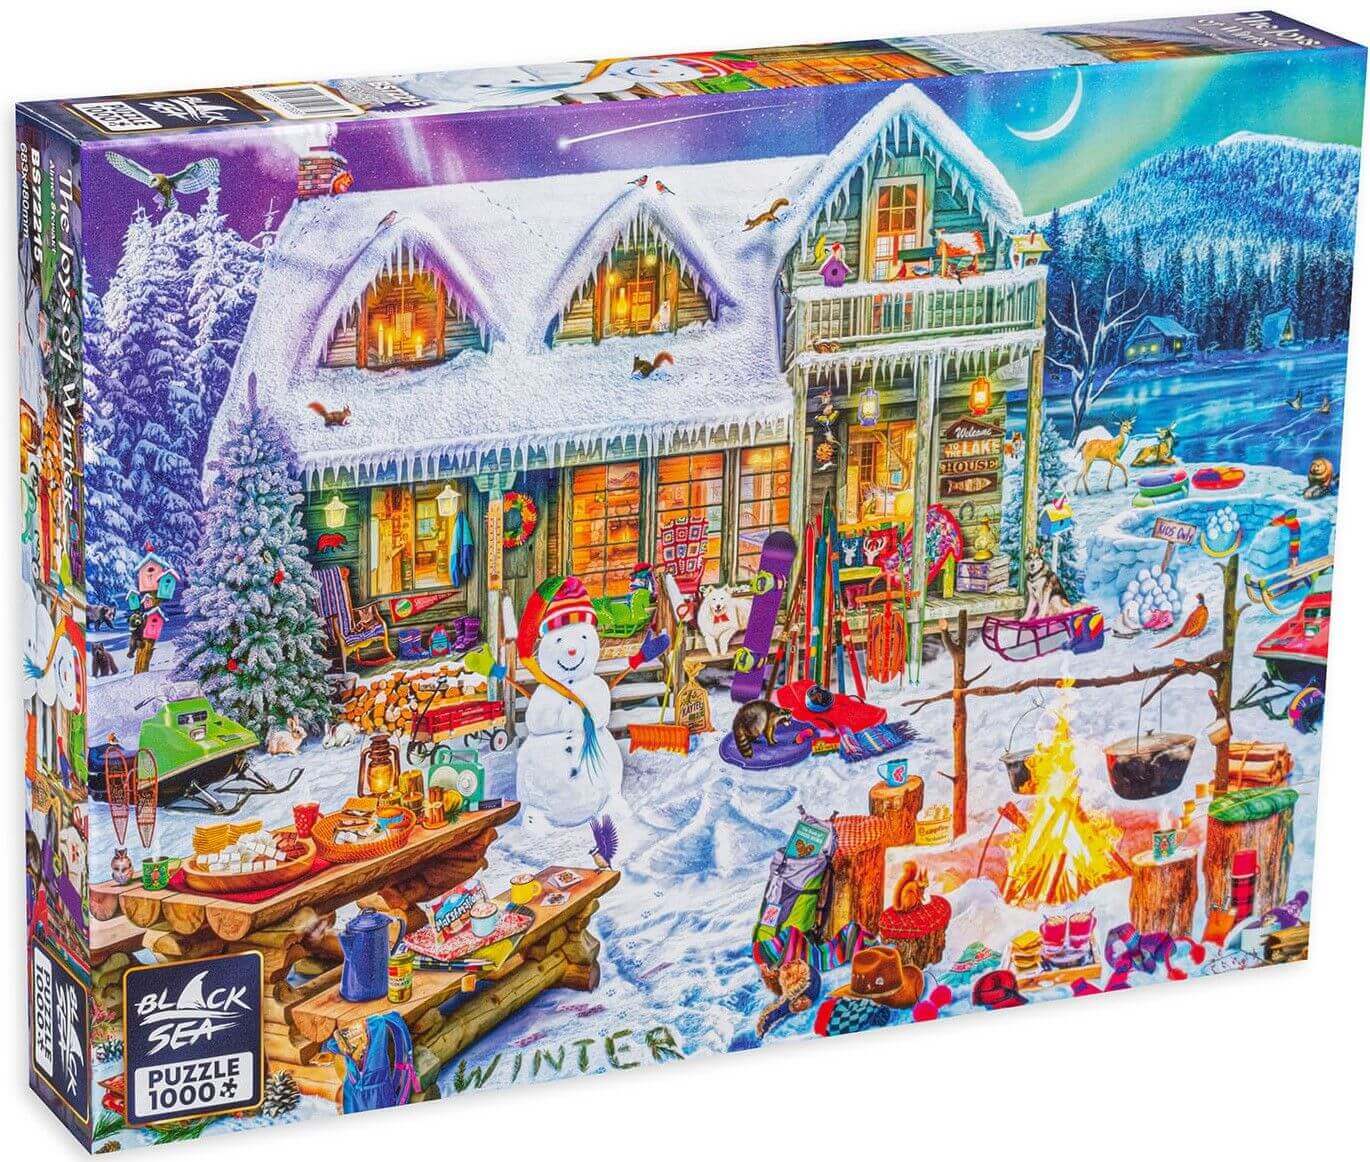 Puzzle Black Sea Premium 1000 pieces - The Joys of Winter, Experience the wintertime joys with a cup of hot chocolate in your hand, a favourite blanket, and a puzzle, which breathes life into the perfect winter imagined by you! Merry-making, figures made